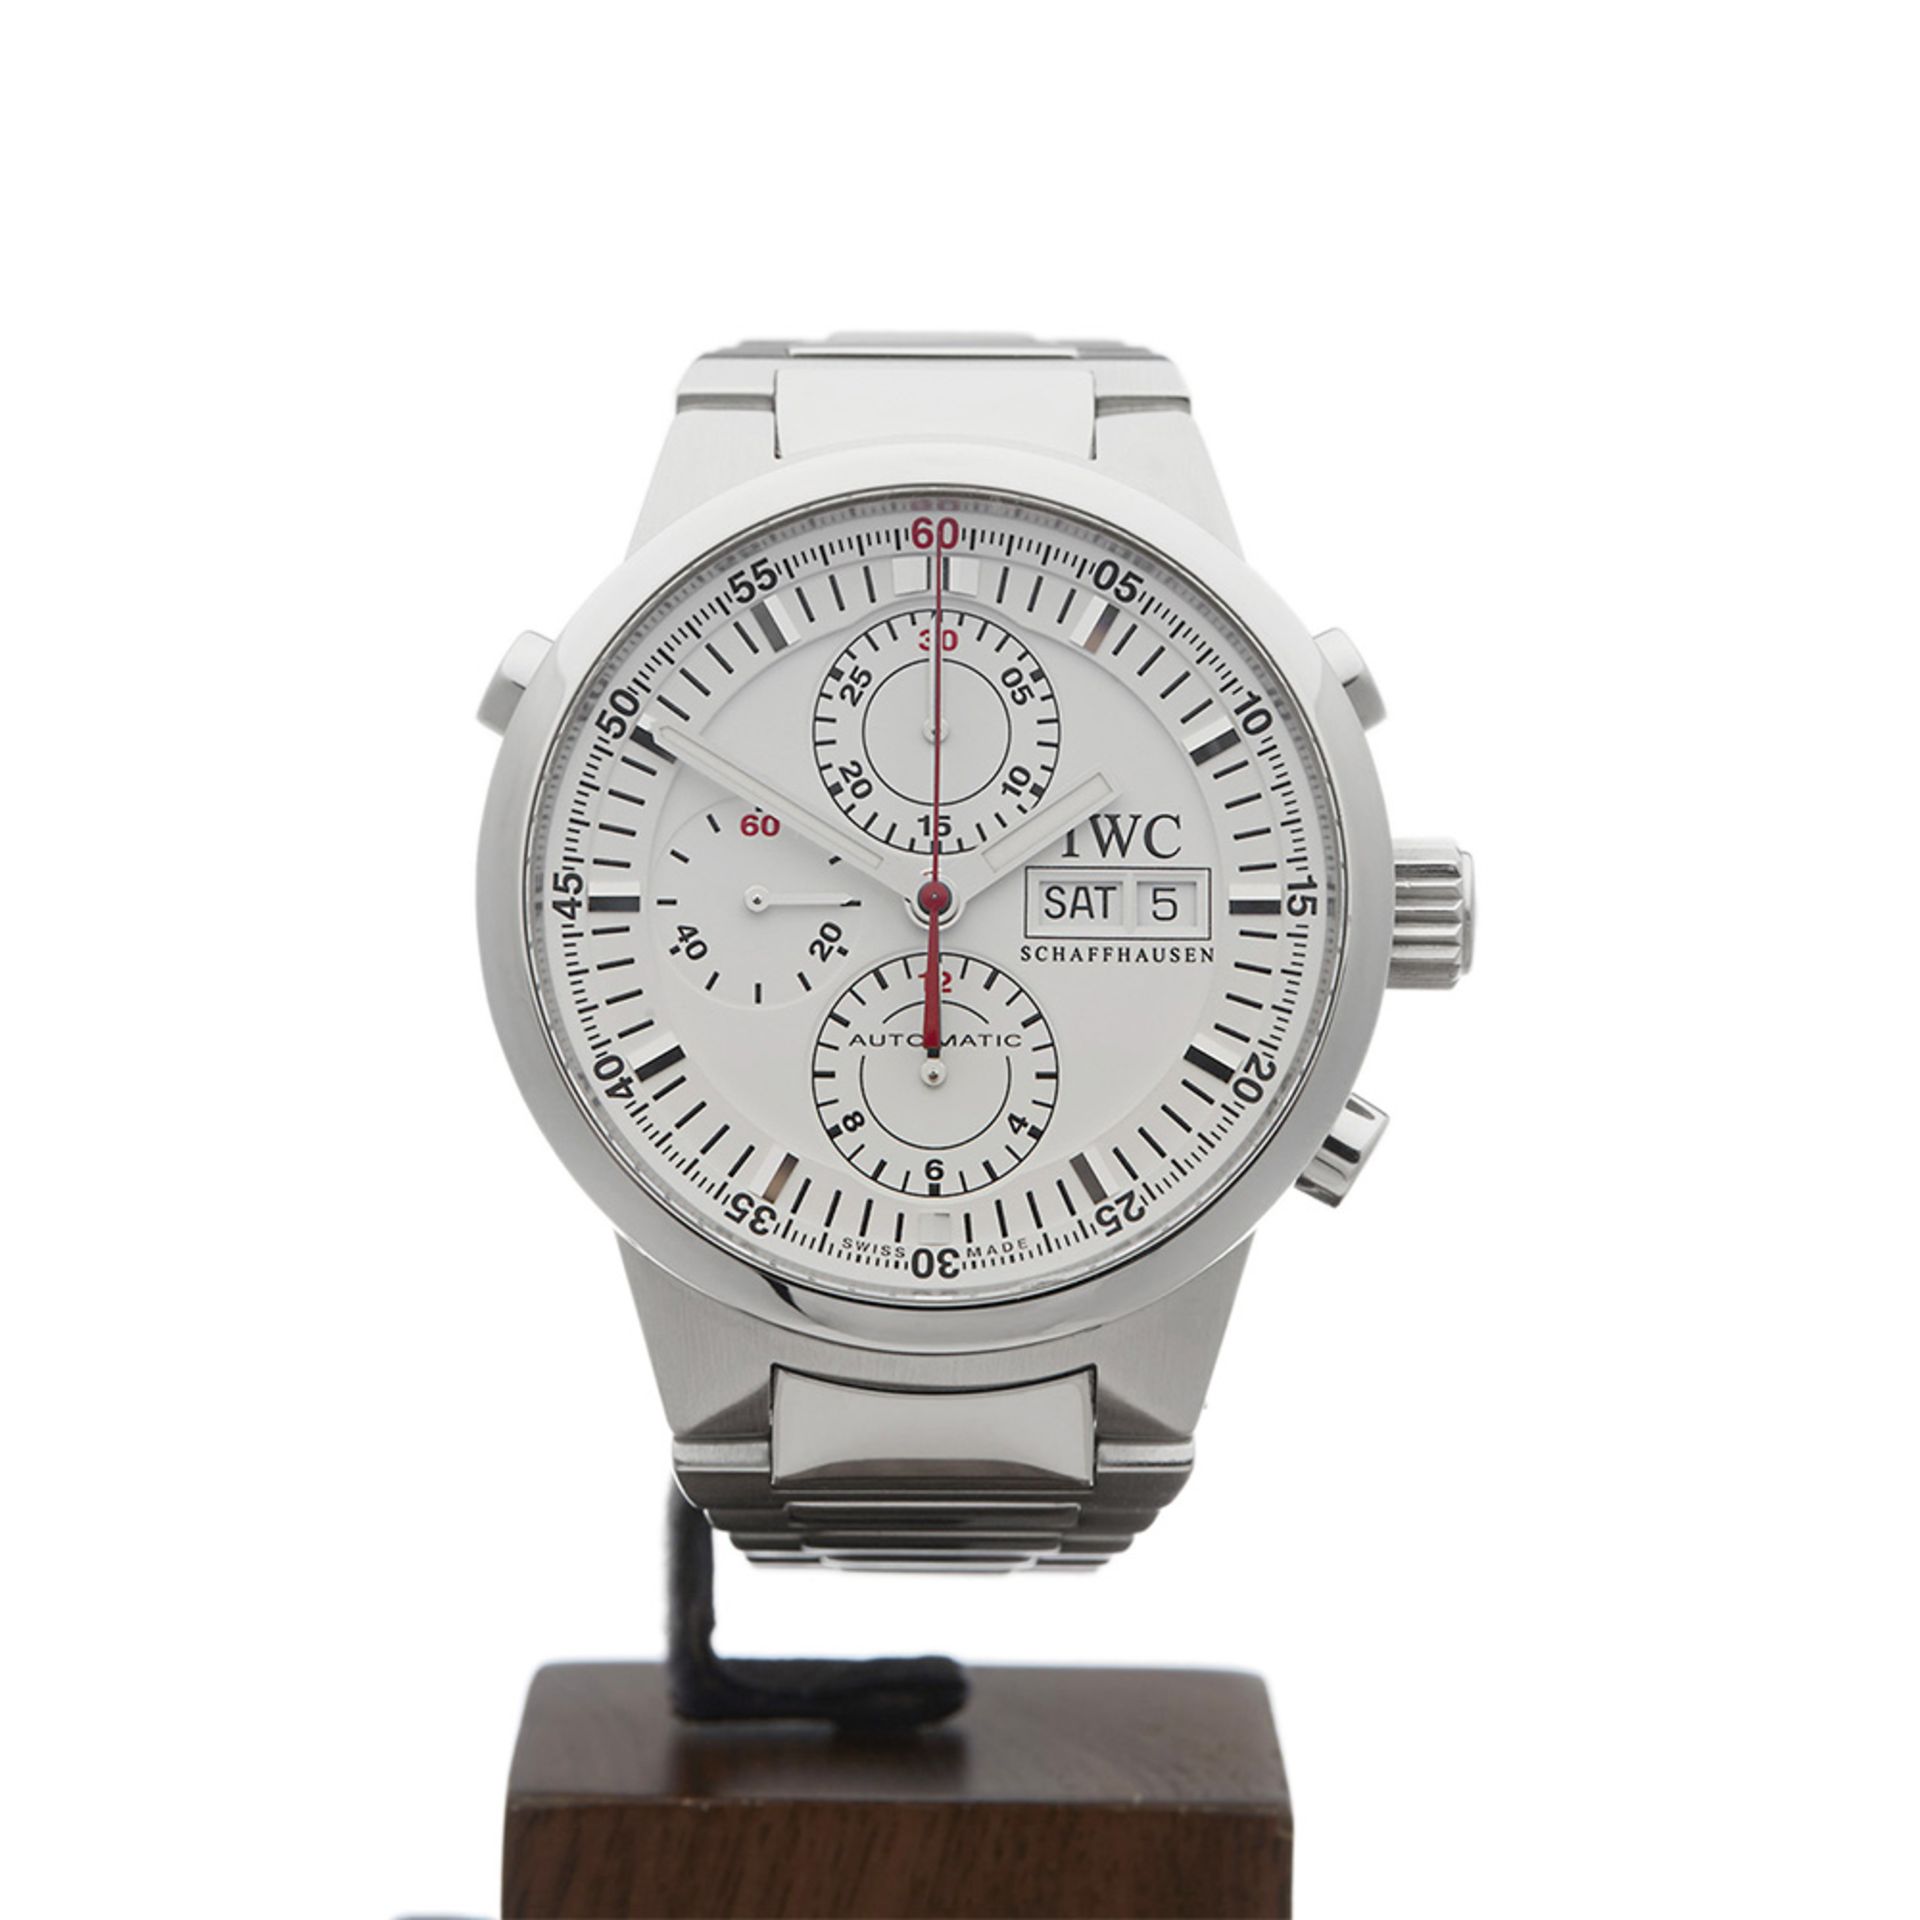 IWC, GST Rattrapante 43mm Stainless Steel IW371523 - Image 2 of 9